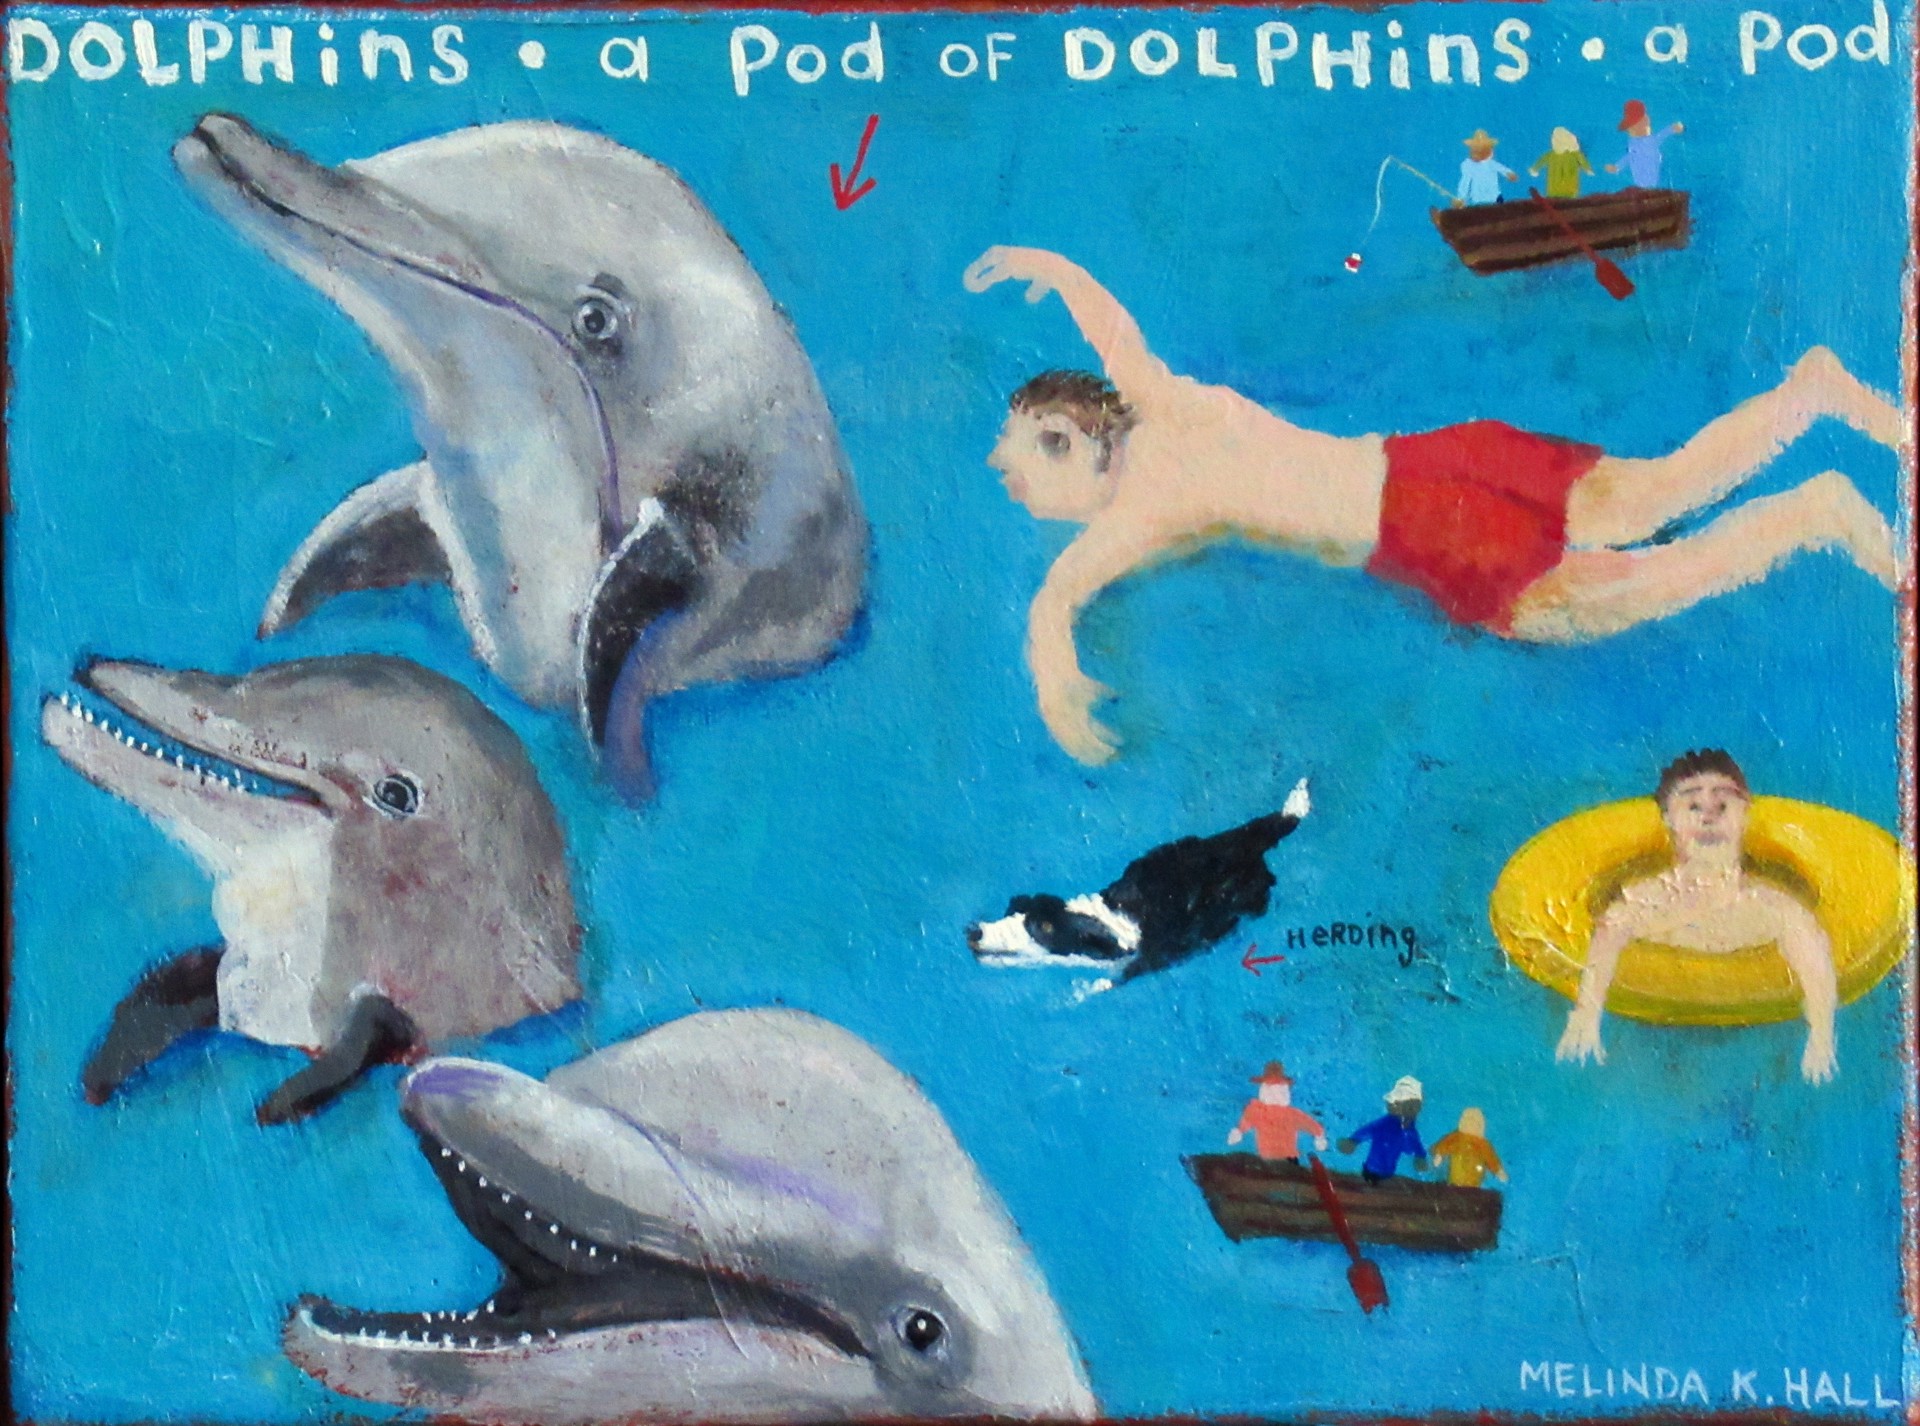 A Pod of Dolphins by Melinda K. Hall